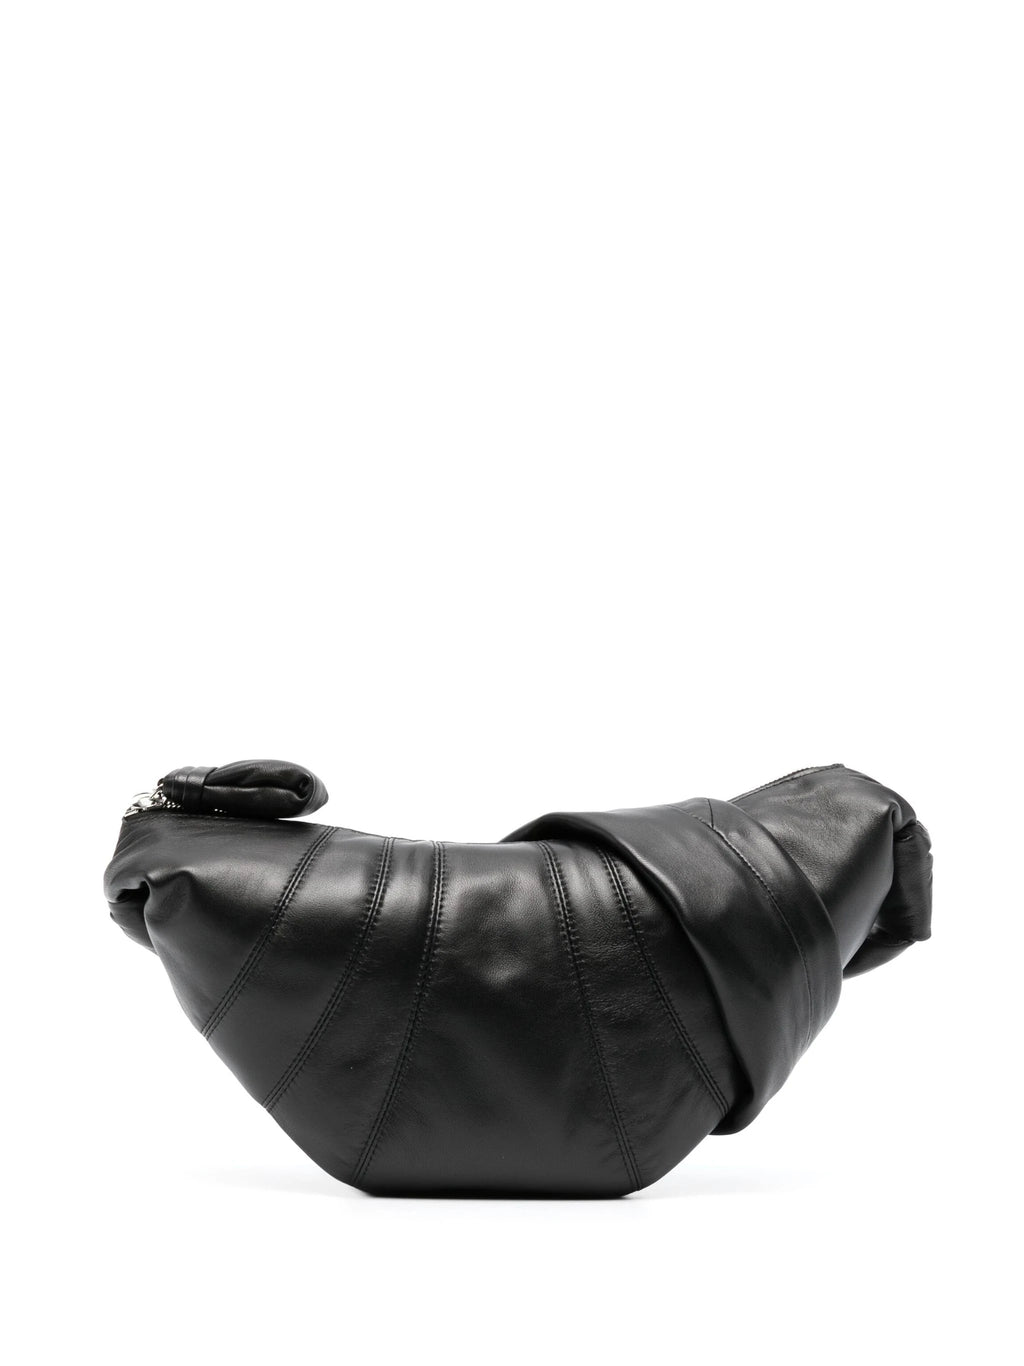 LEMAIRE Unisex Soft Nappa Small Croissant Bag